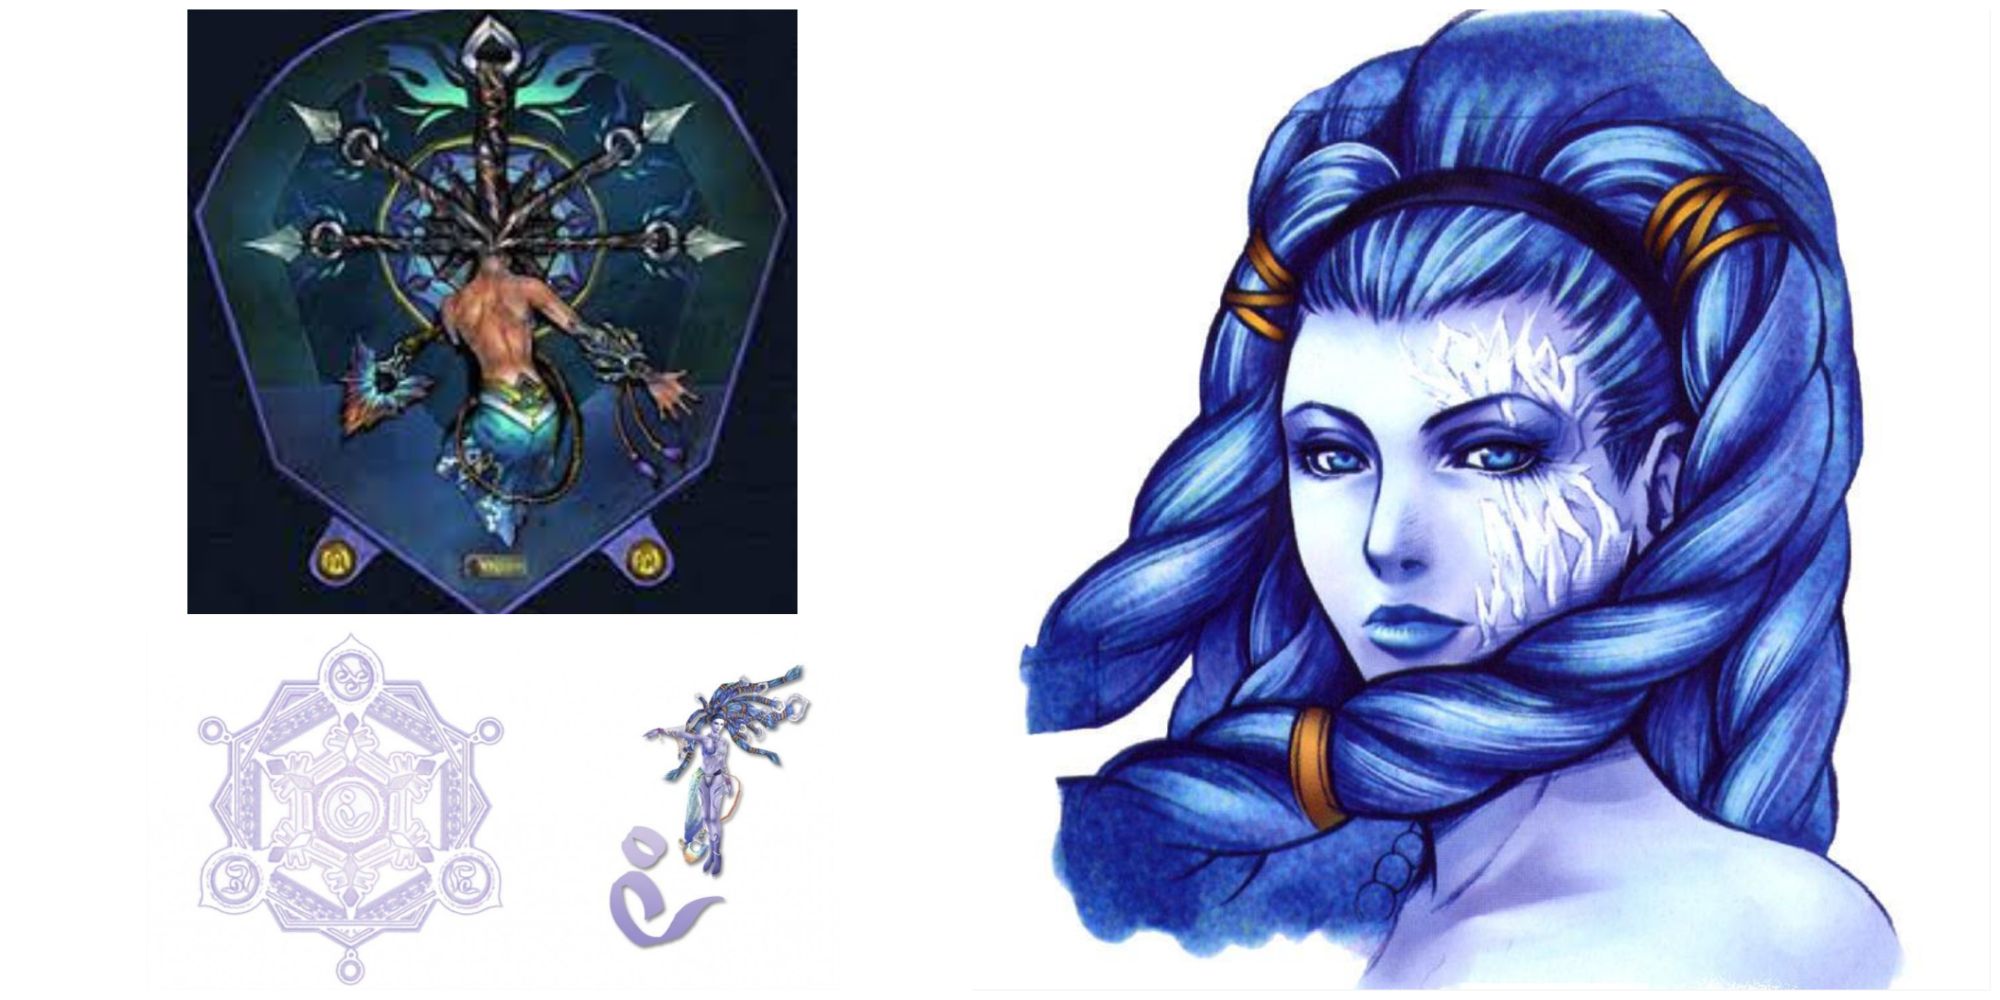 Final Fantasy X Shiva, featuring her sprite, fayth statue, summoning glyph and symbol, and her in-game model